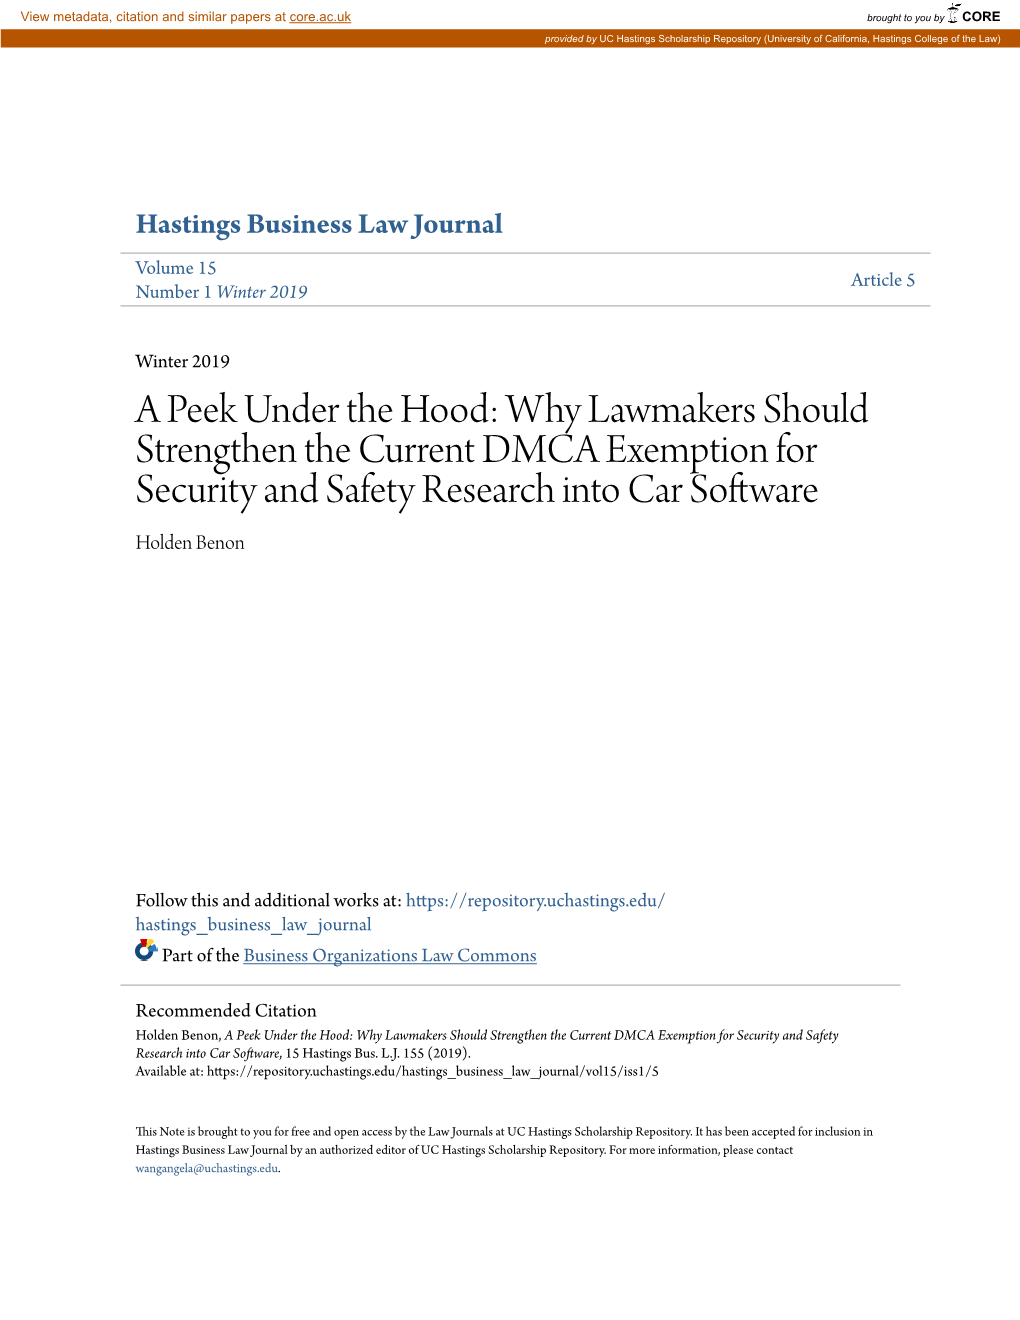 Why Lawmakers Should Strengthen the Current DMCA Exemption for Security and Safety Research Into Car Software Holden Benon